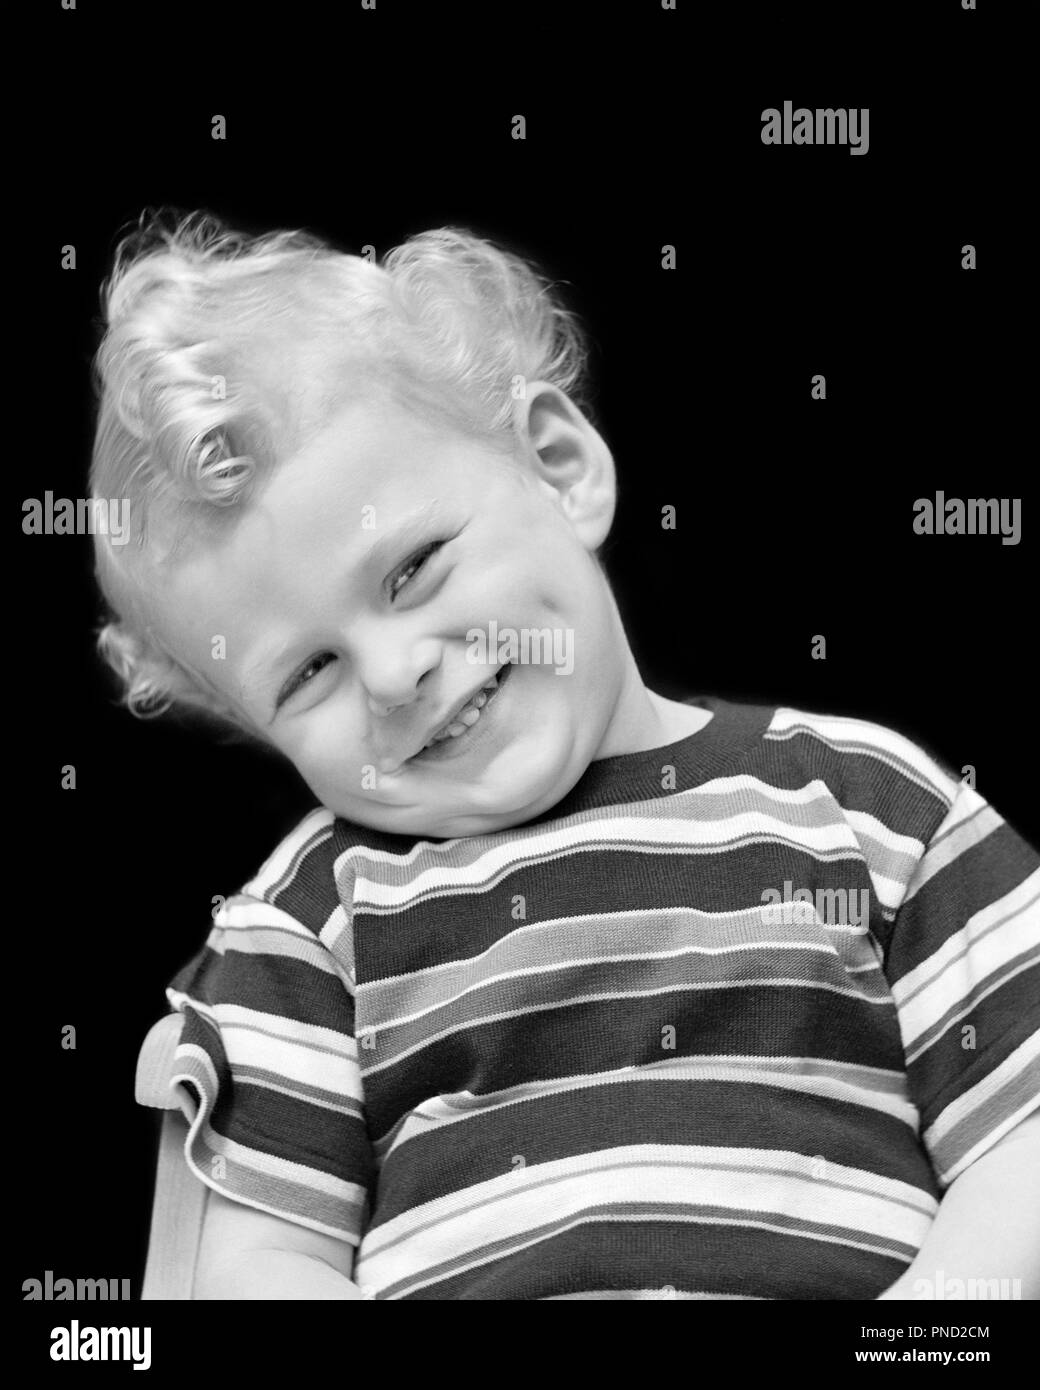 1940s Portrait Of Smiling Boy With Blond Curly Hair Head Cocked To Side Wearing Striped Tee Shirt Looking At Camera J95 Har001 Hars Pleased Joy Lifestyle Striped Healthiness Home Life Half Length Males